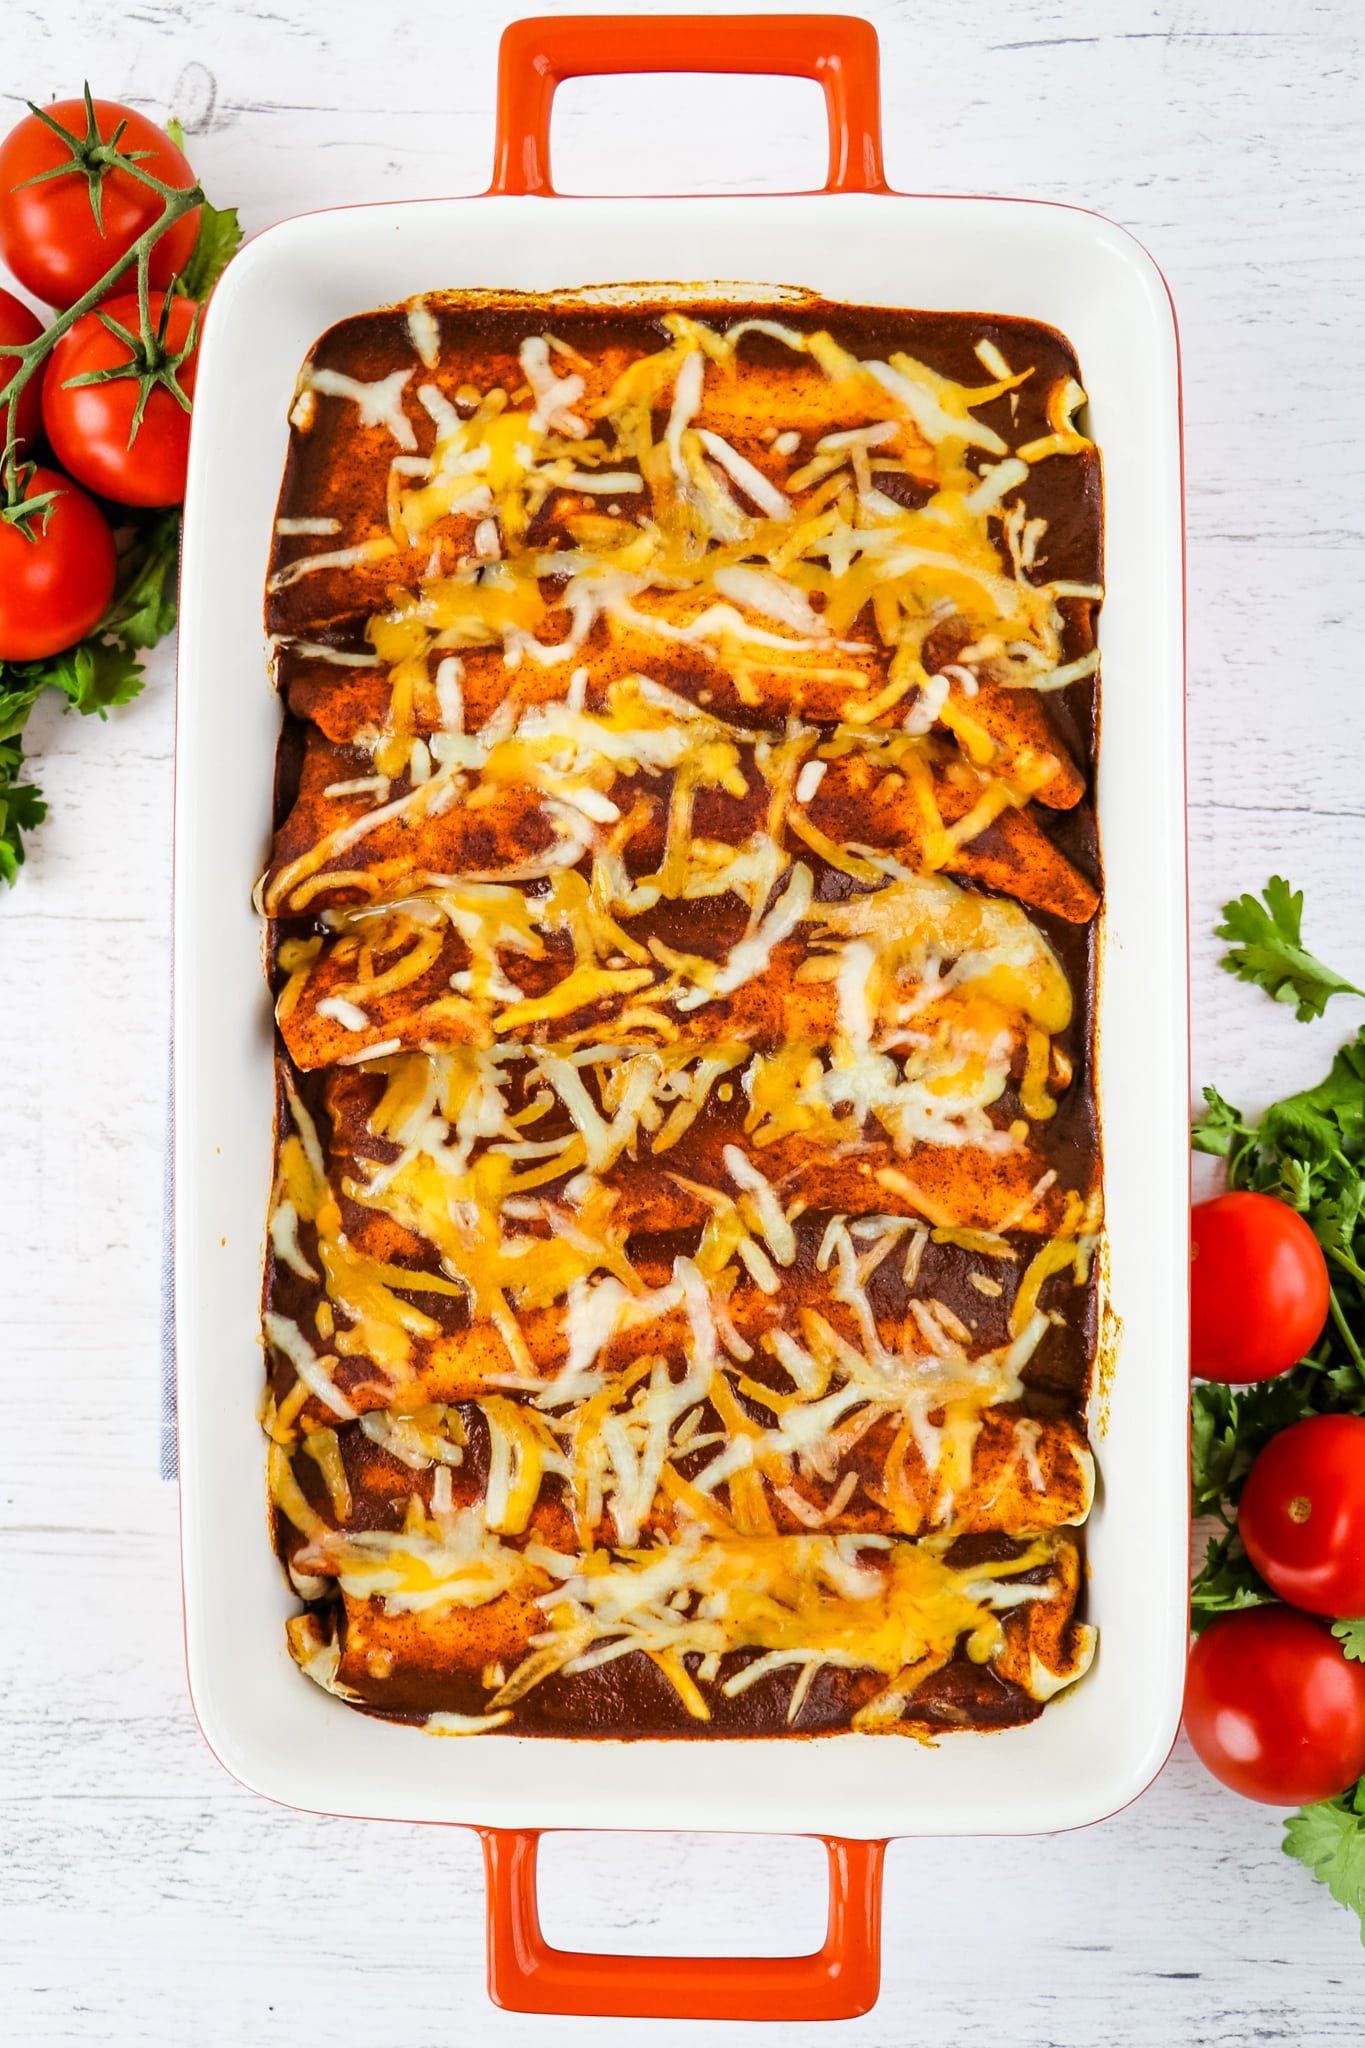 Pan of baked enchiladas with melted shredded cheese.